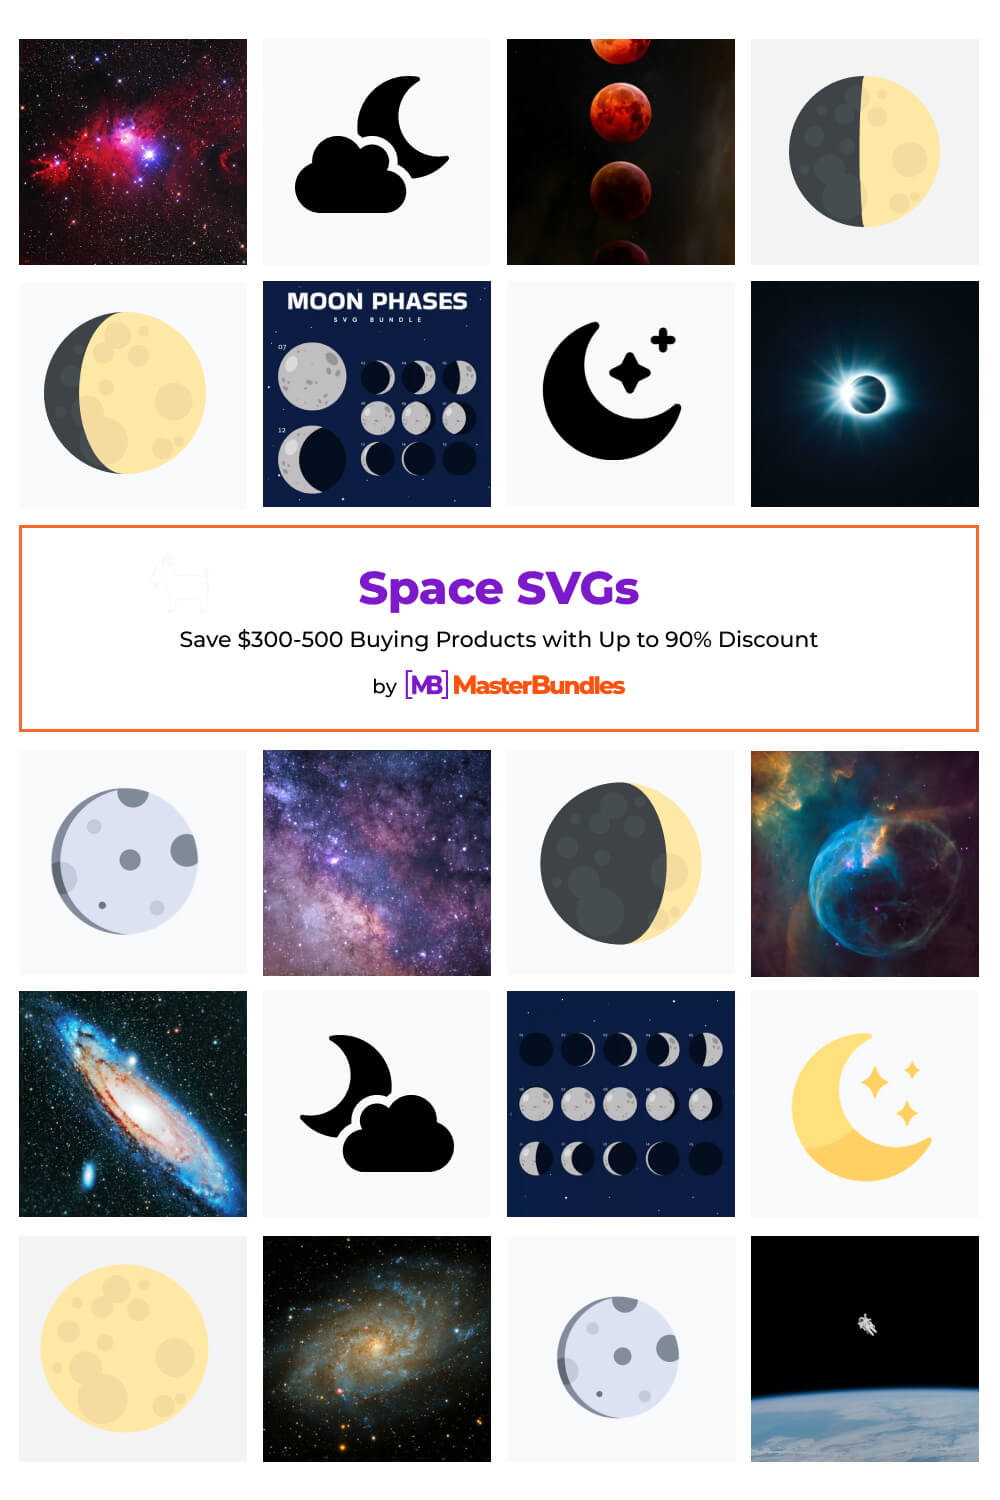 space svgs pinterest image.